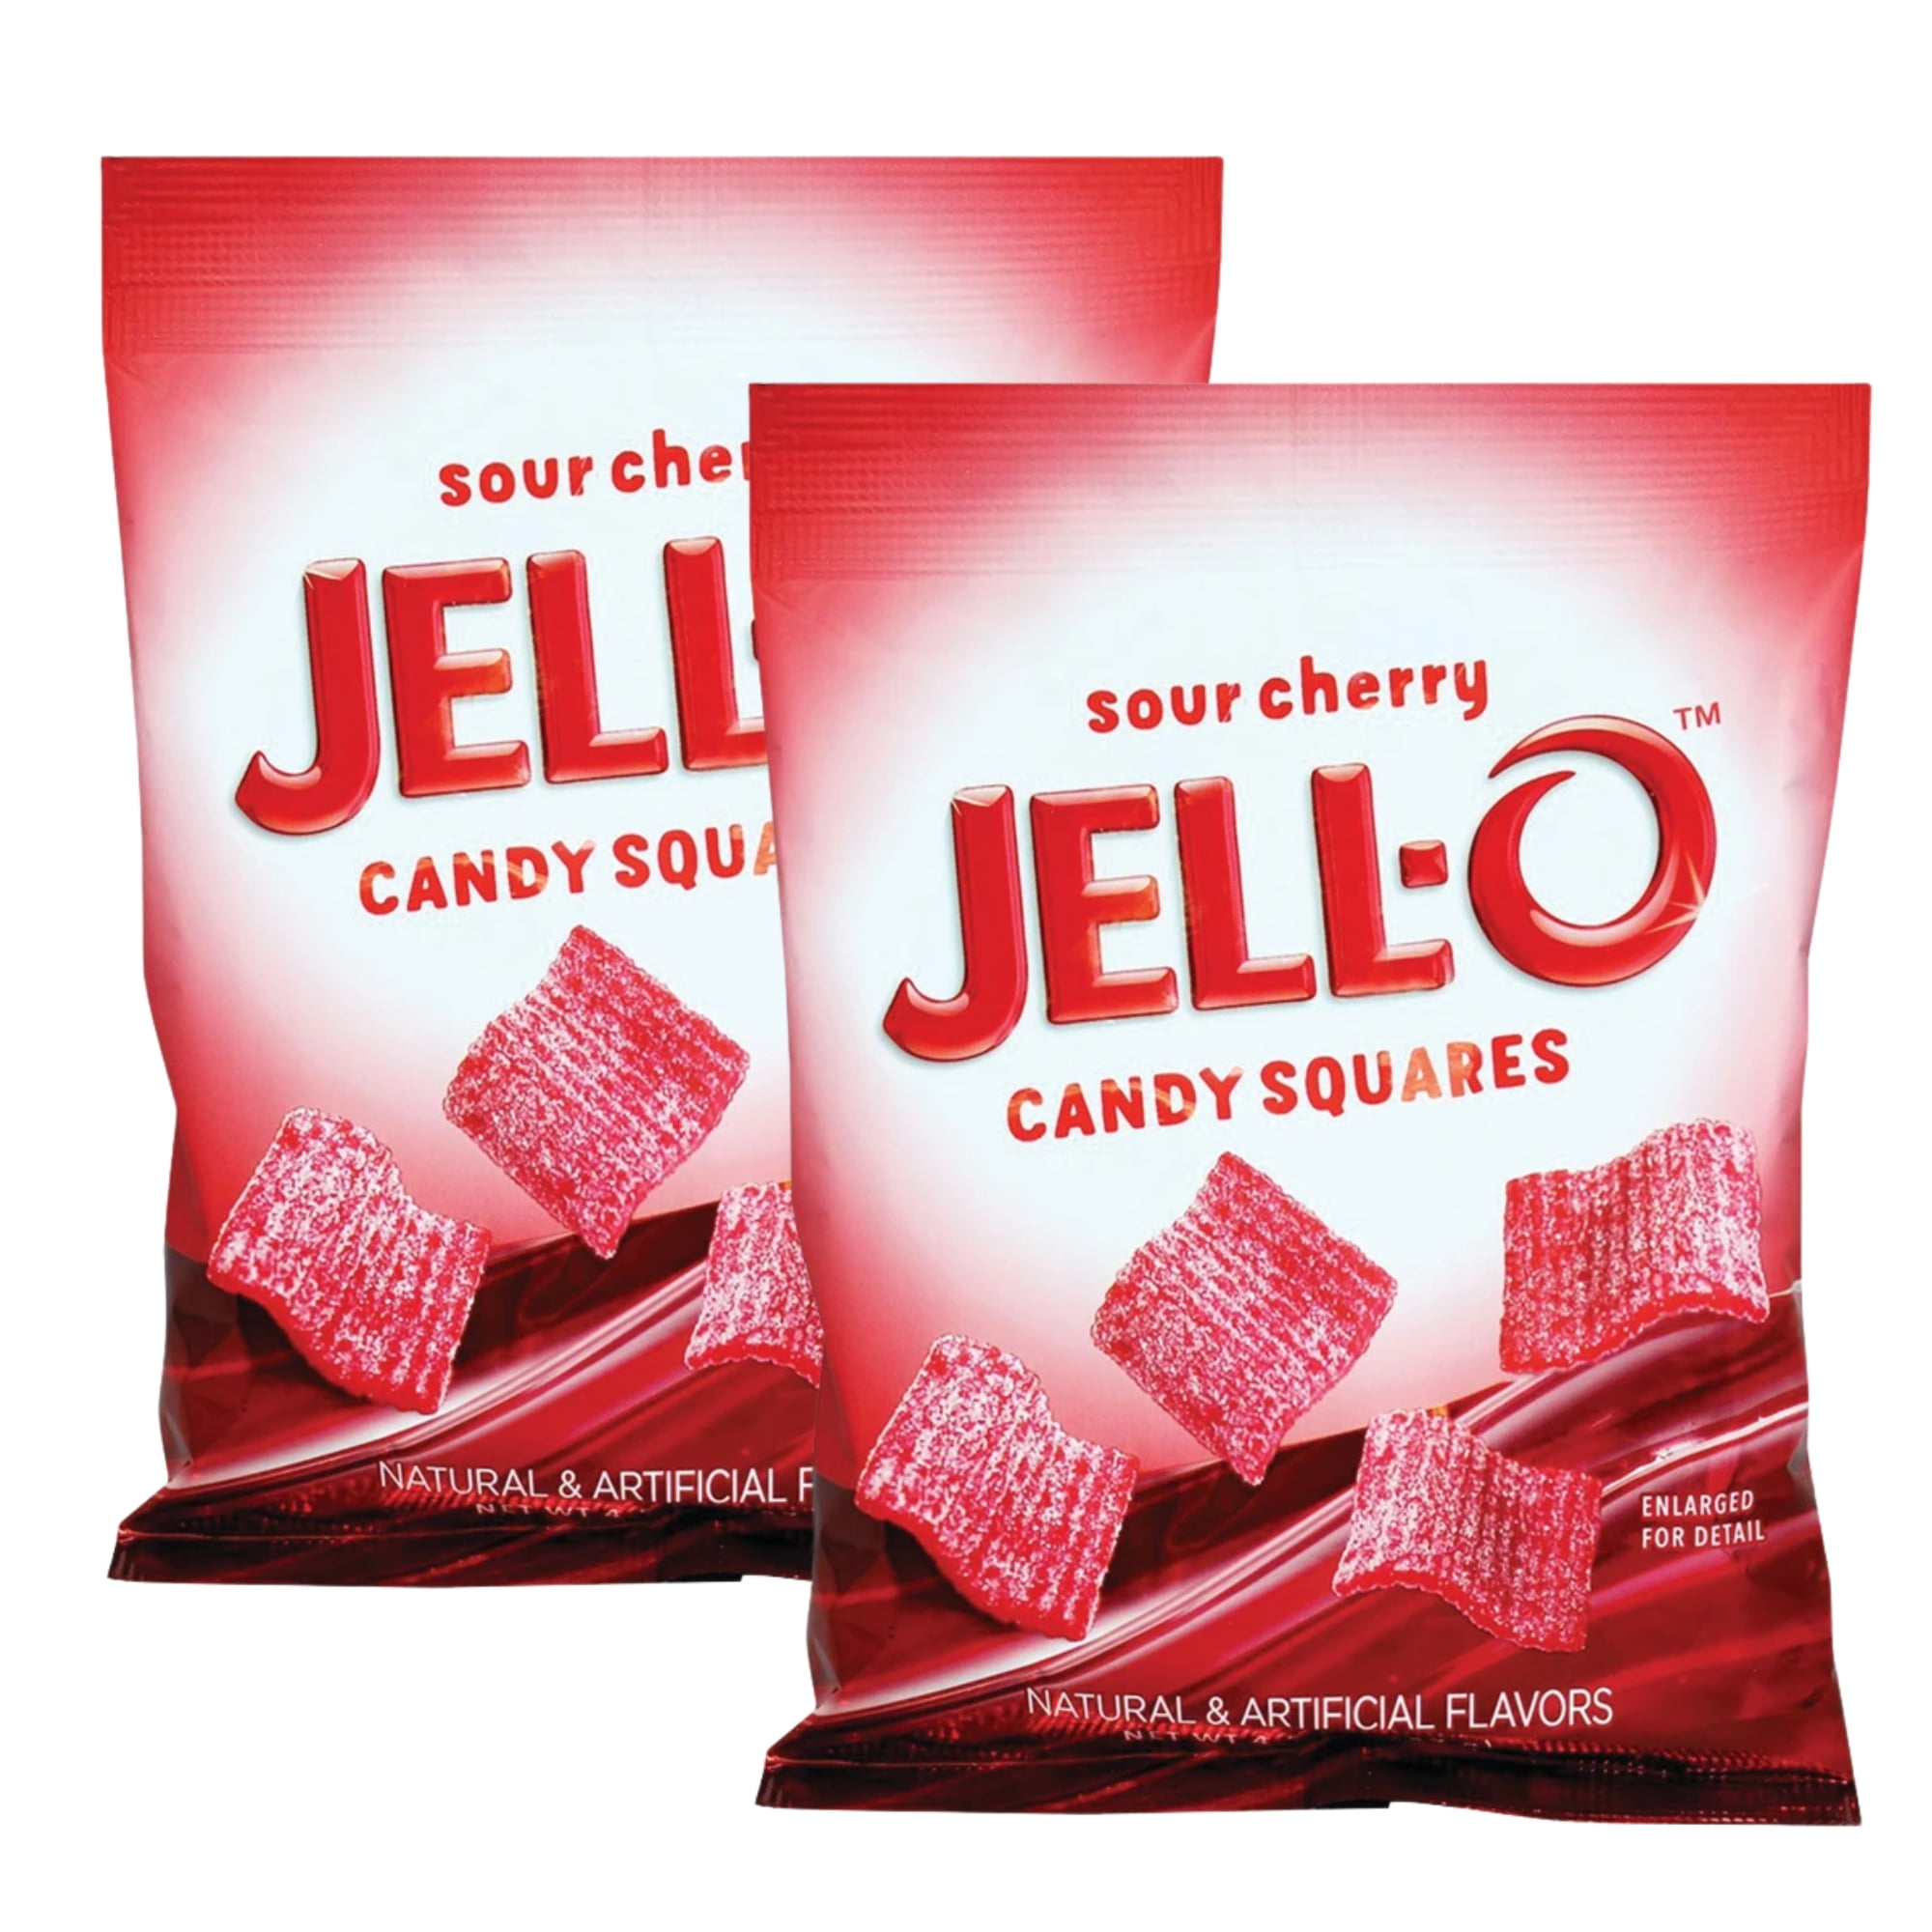 Jell-O Gummi Candy, 4.5oz Sour Cherry Squares, Soft Chewy Sour